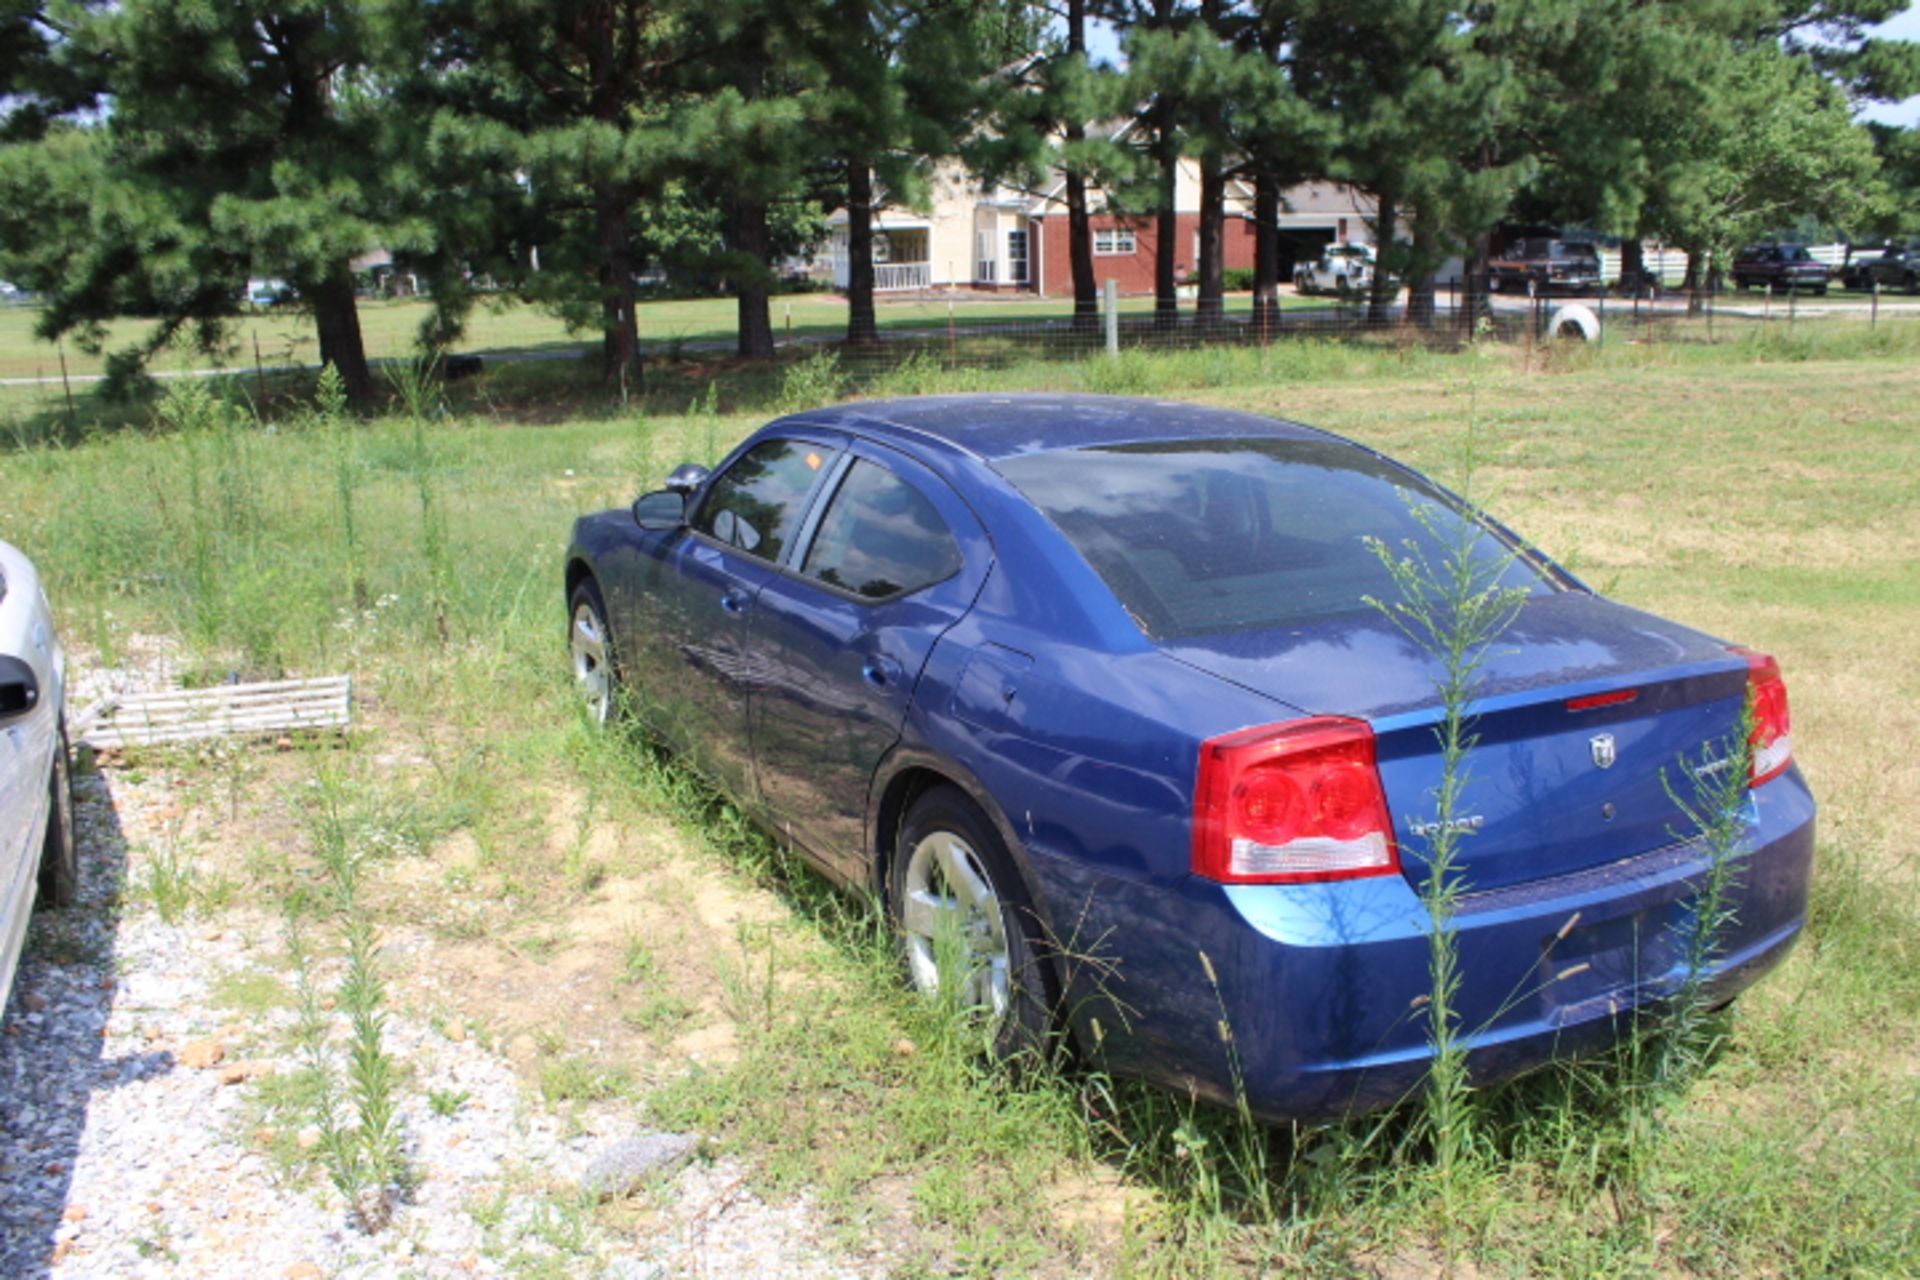 2009 DODGE CHARGER, HAS A FEW ISSUES, 95,075 MILES. - Image 2 of 4